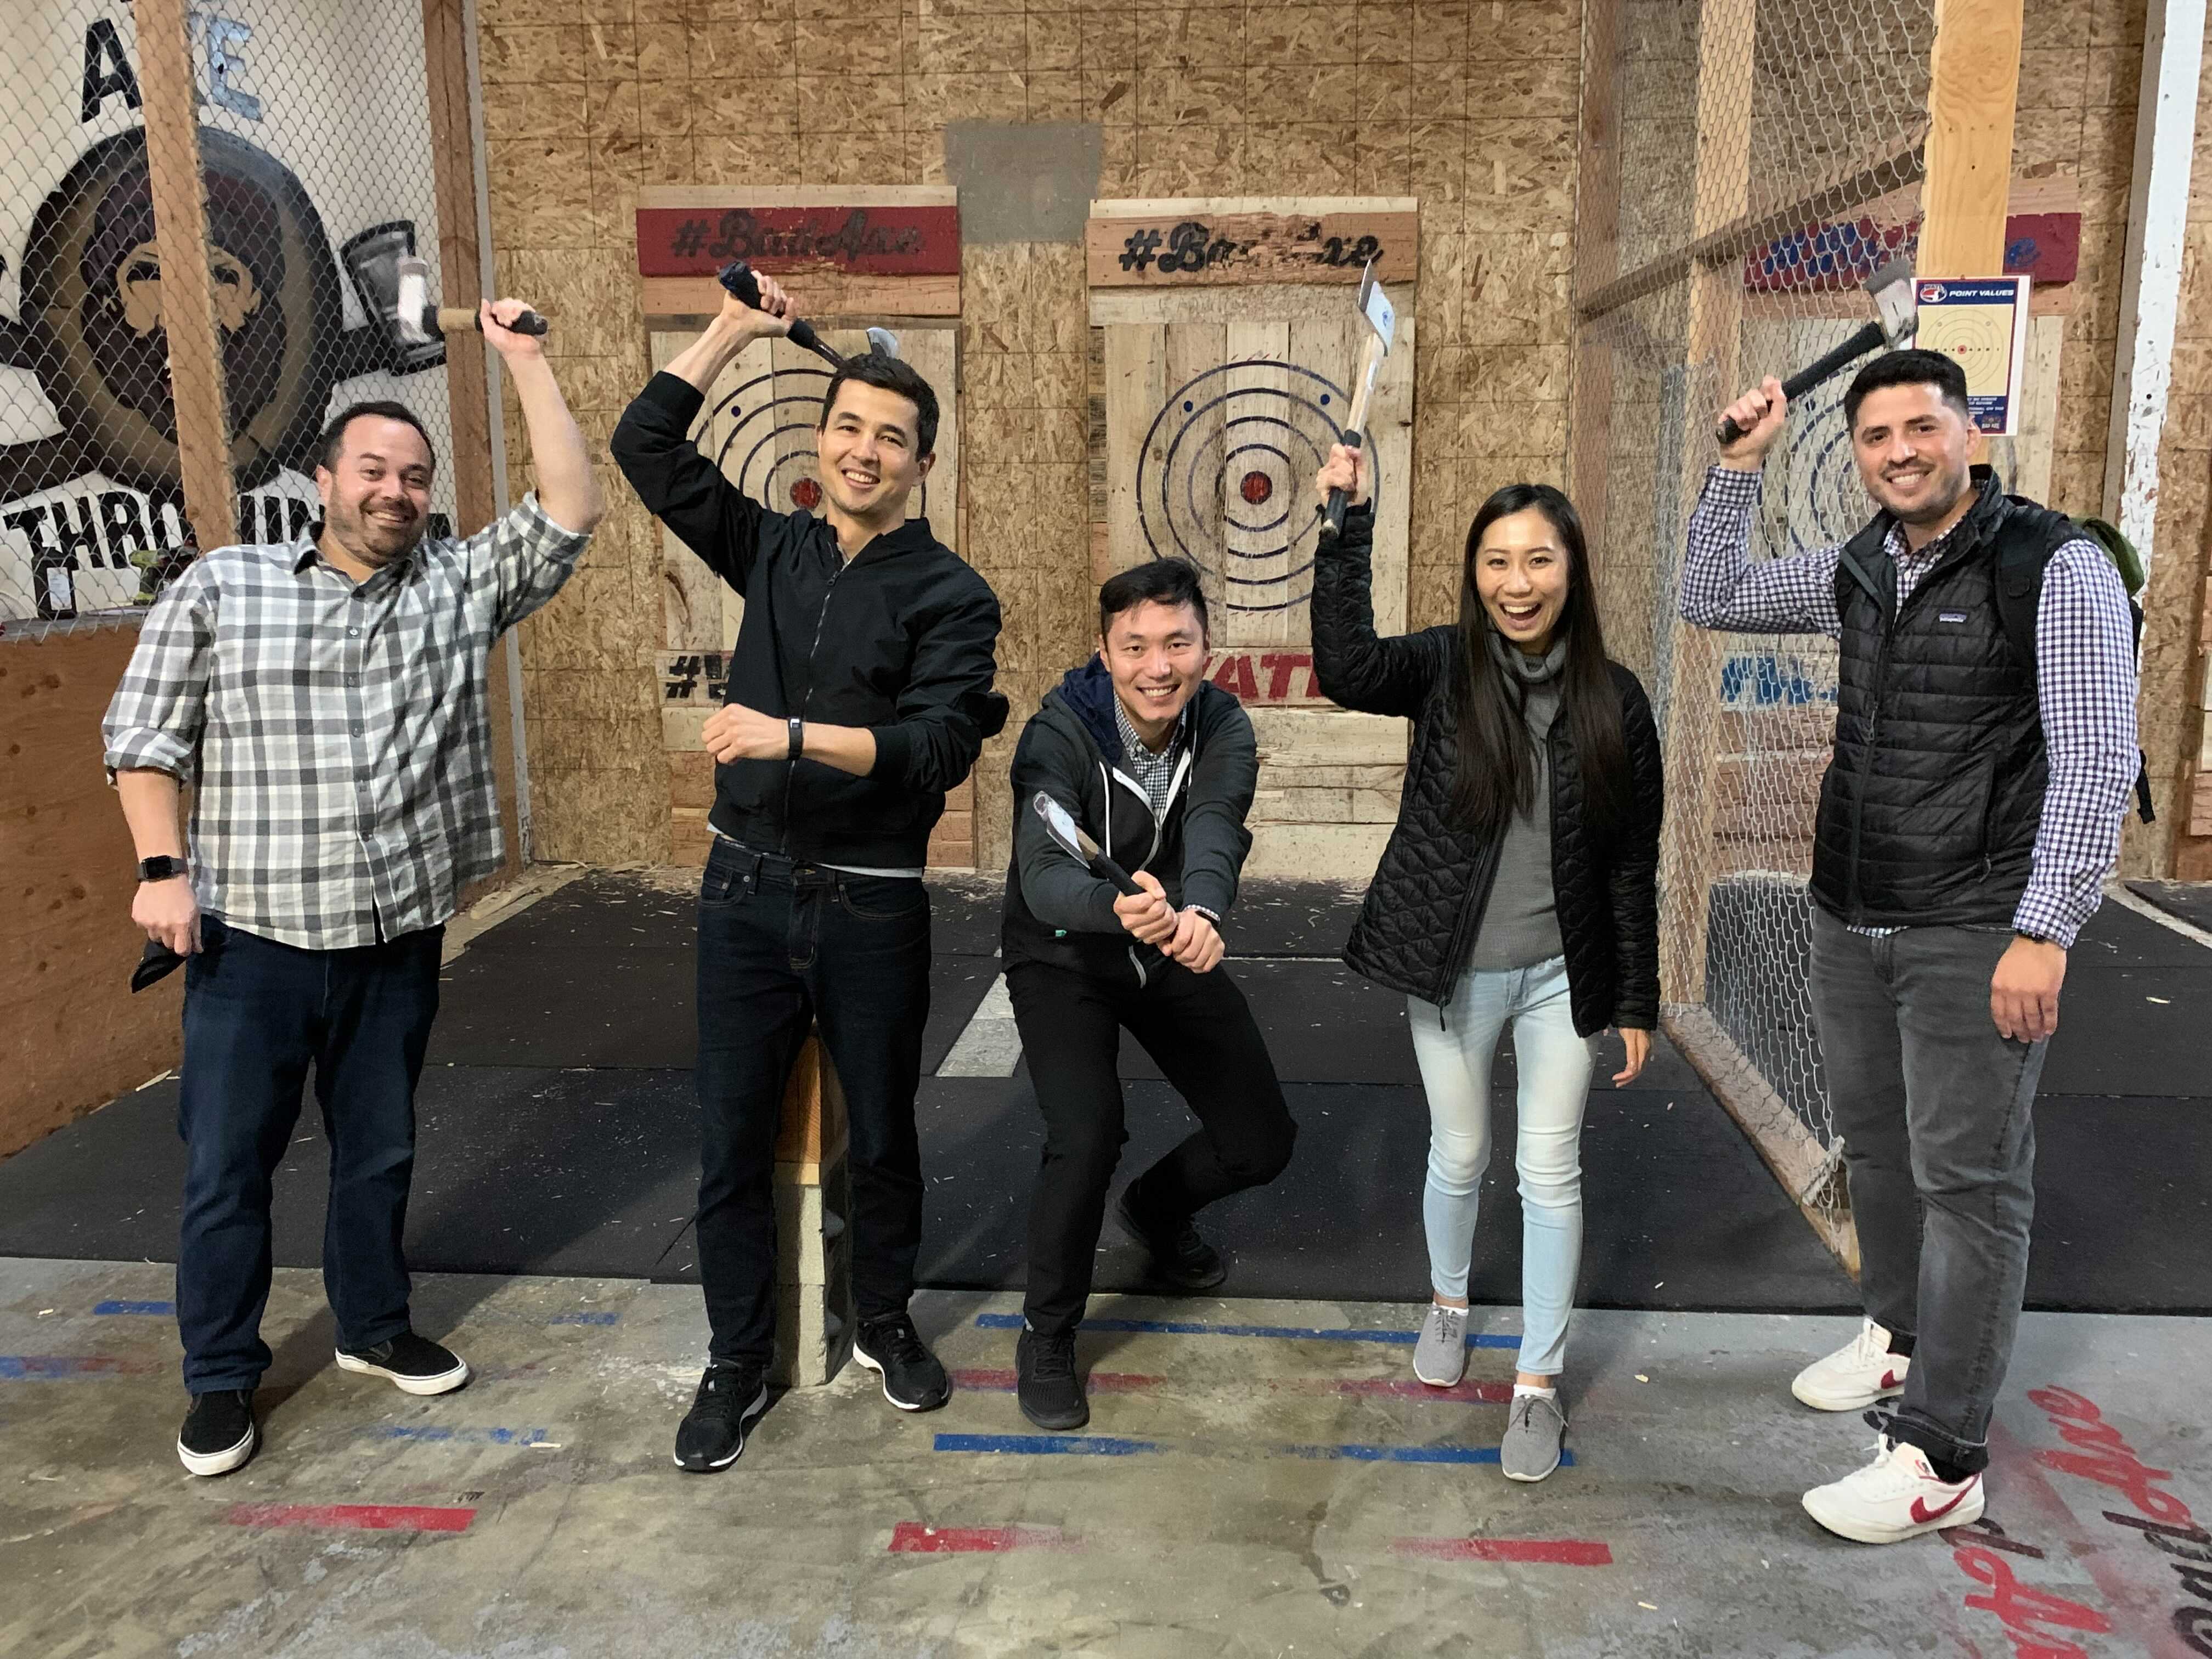 Pictures of employees throwing axes.